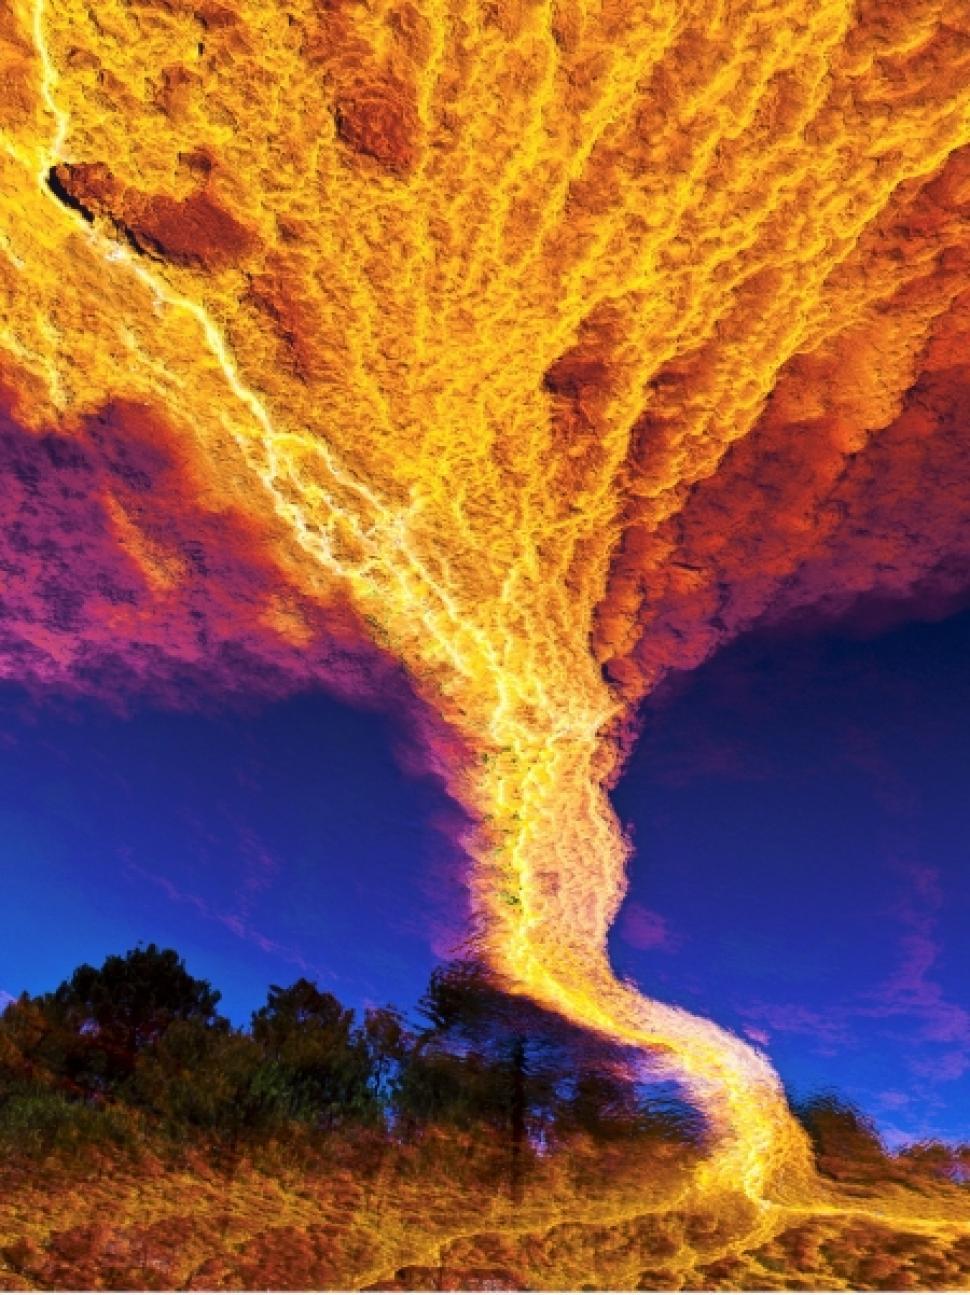 Photographer 'captures' tornado of fire in river bed. Rivers